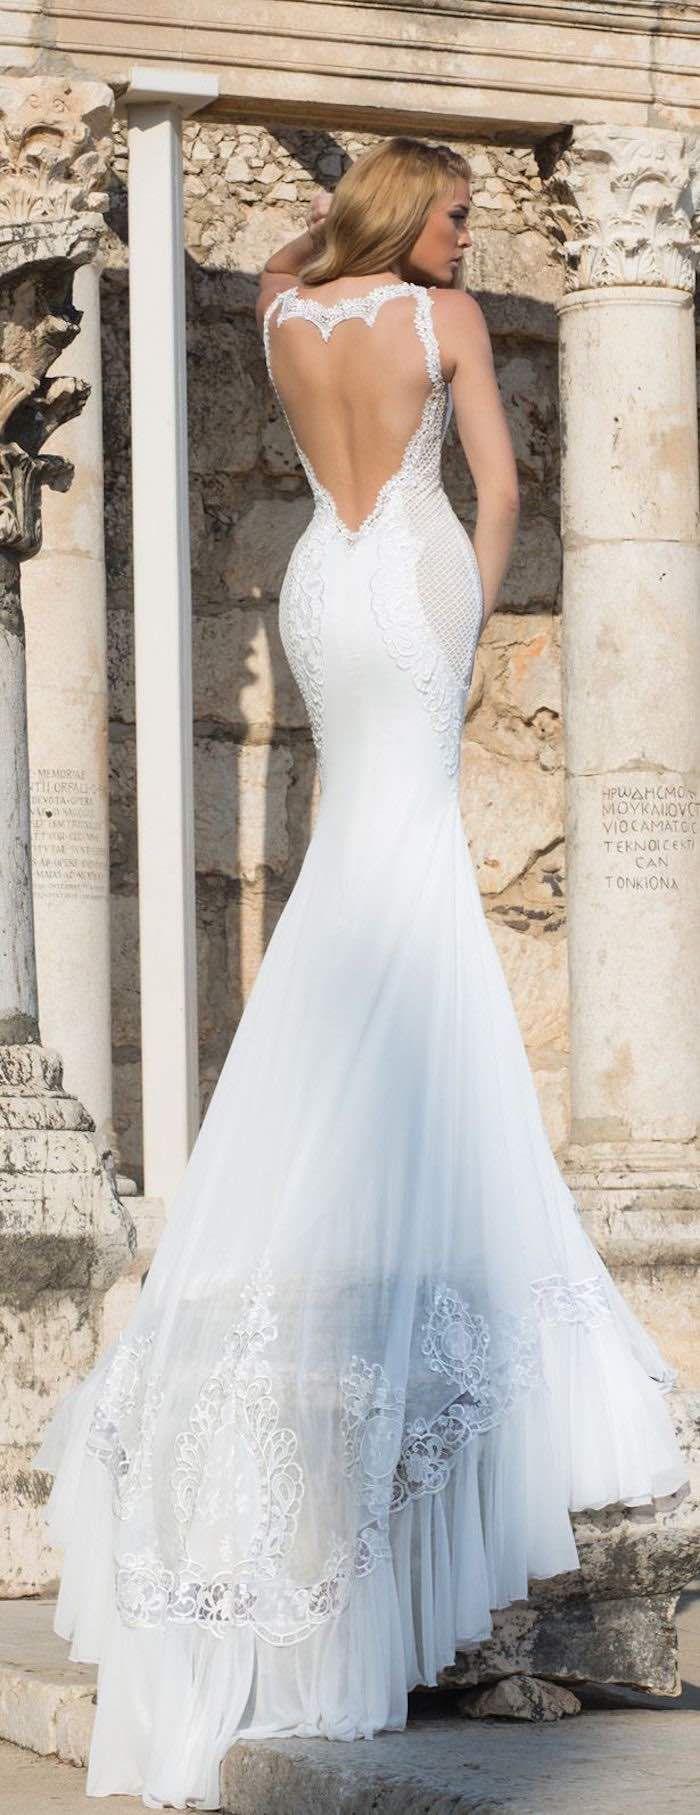 Wedding - Sexy Wedding Dresses With Hottest Details